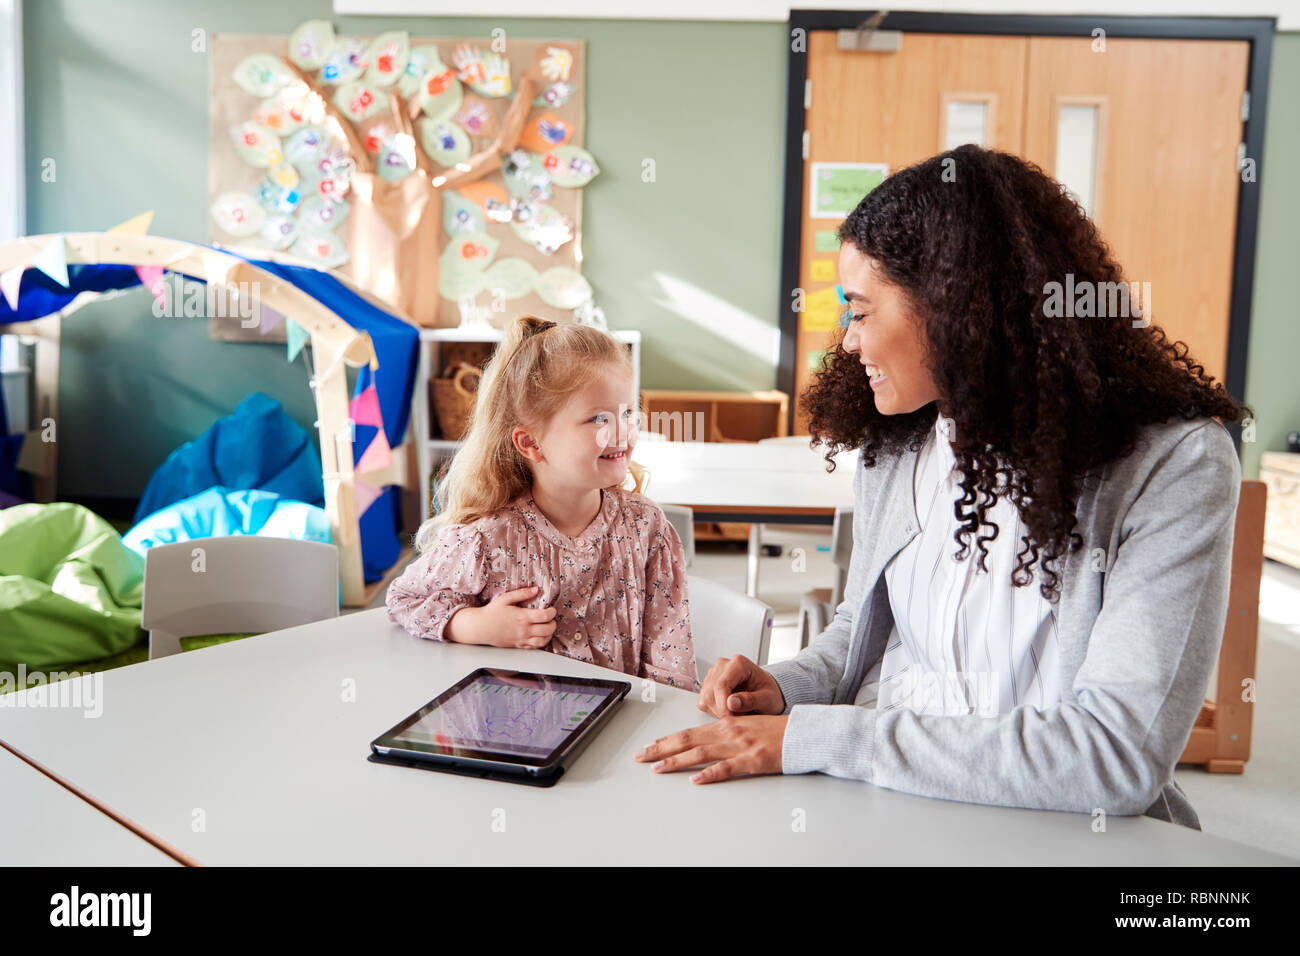 Young white schoolgirl working one on one together in a classroom with a female infant school teacher, smiling at each other, close up Stock Photo